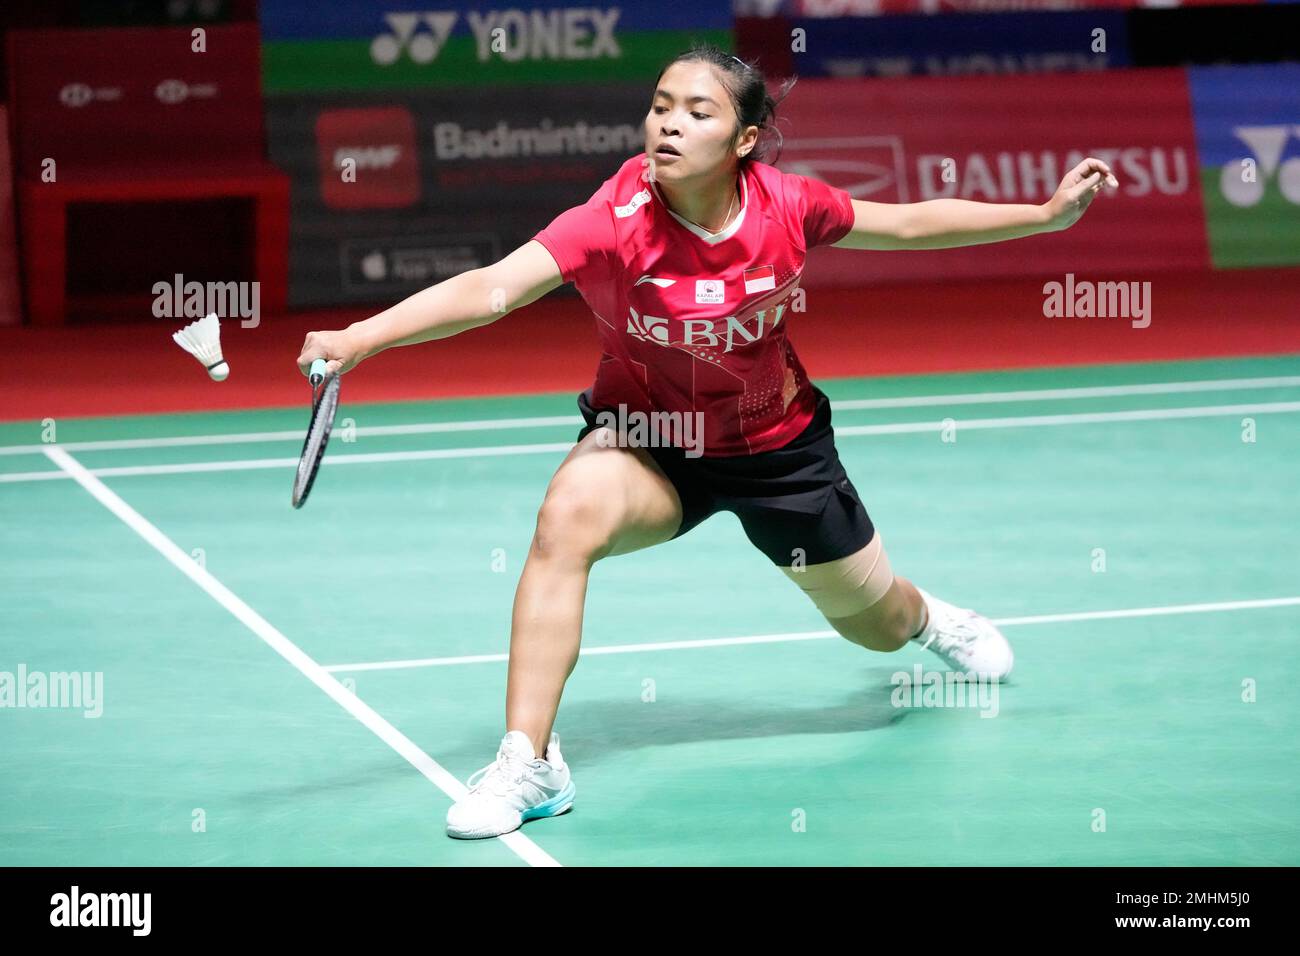 Indonesias Gregoria Mariska Tunjung return a shoot to Chinas Han Yue during the womens single match in the Indonesia Masters badminton tournament at the Istora Stadium in Jakarta, Indonesia, Friday, Jan